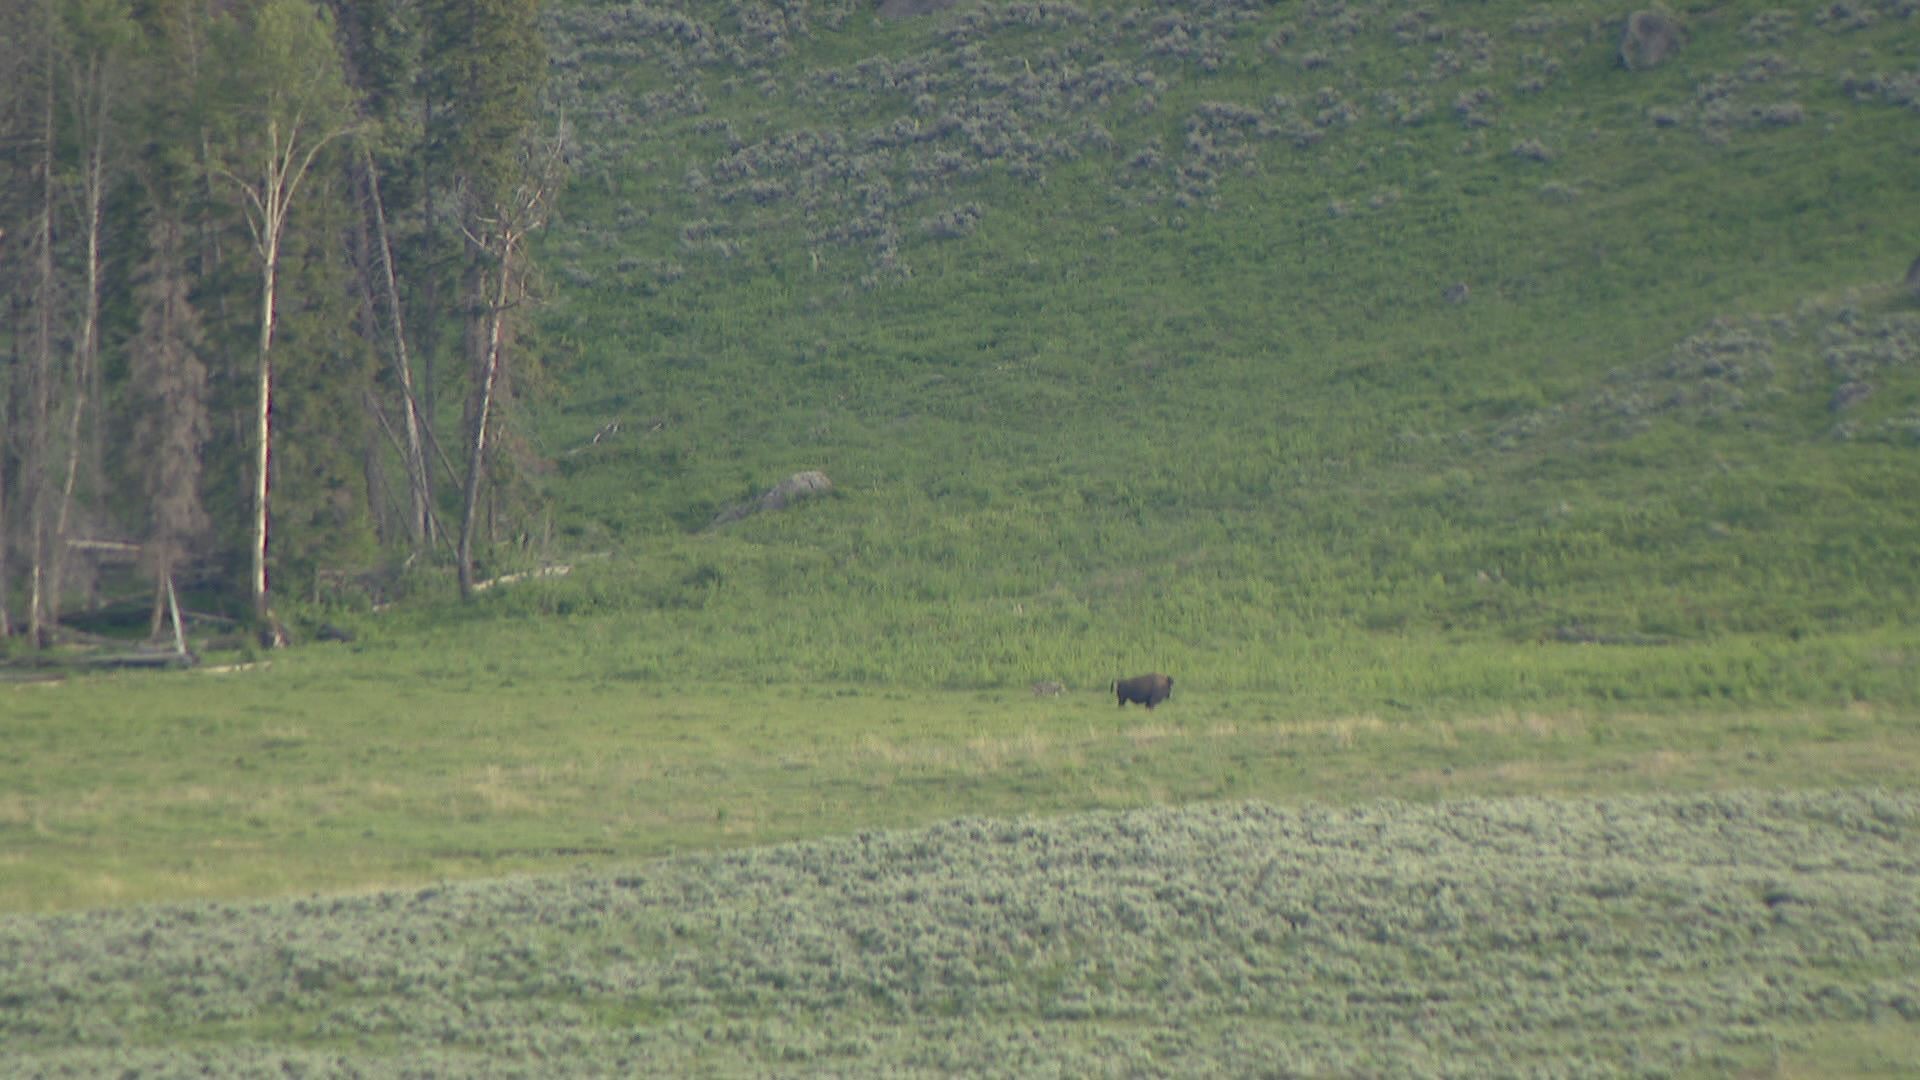 A wolf approaches a bison in Yellowstone.